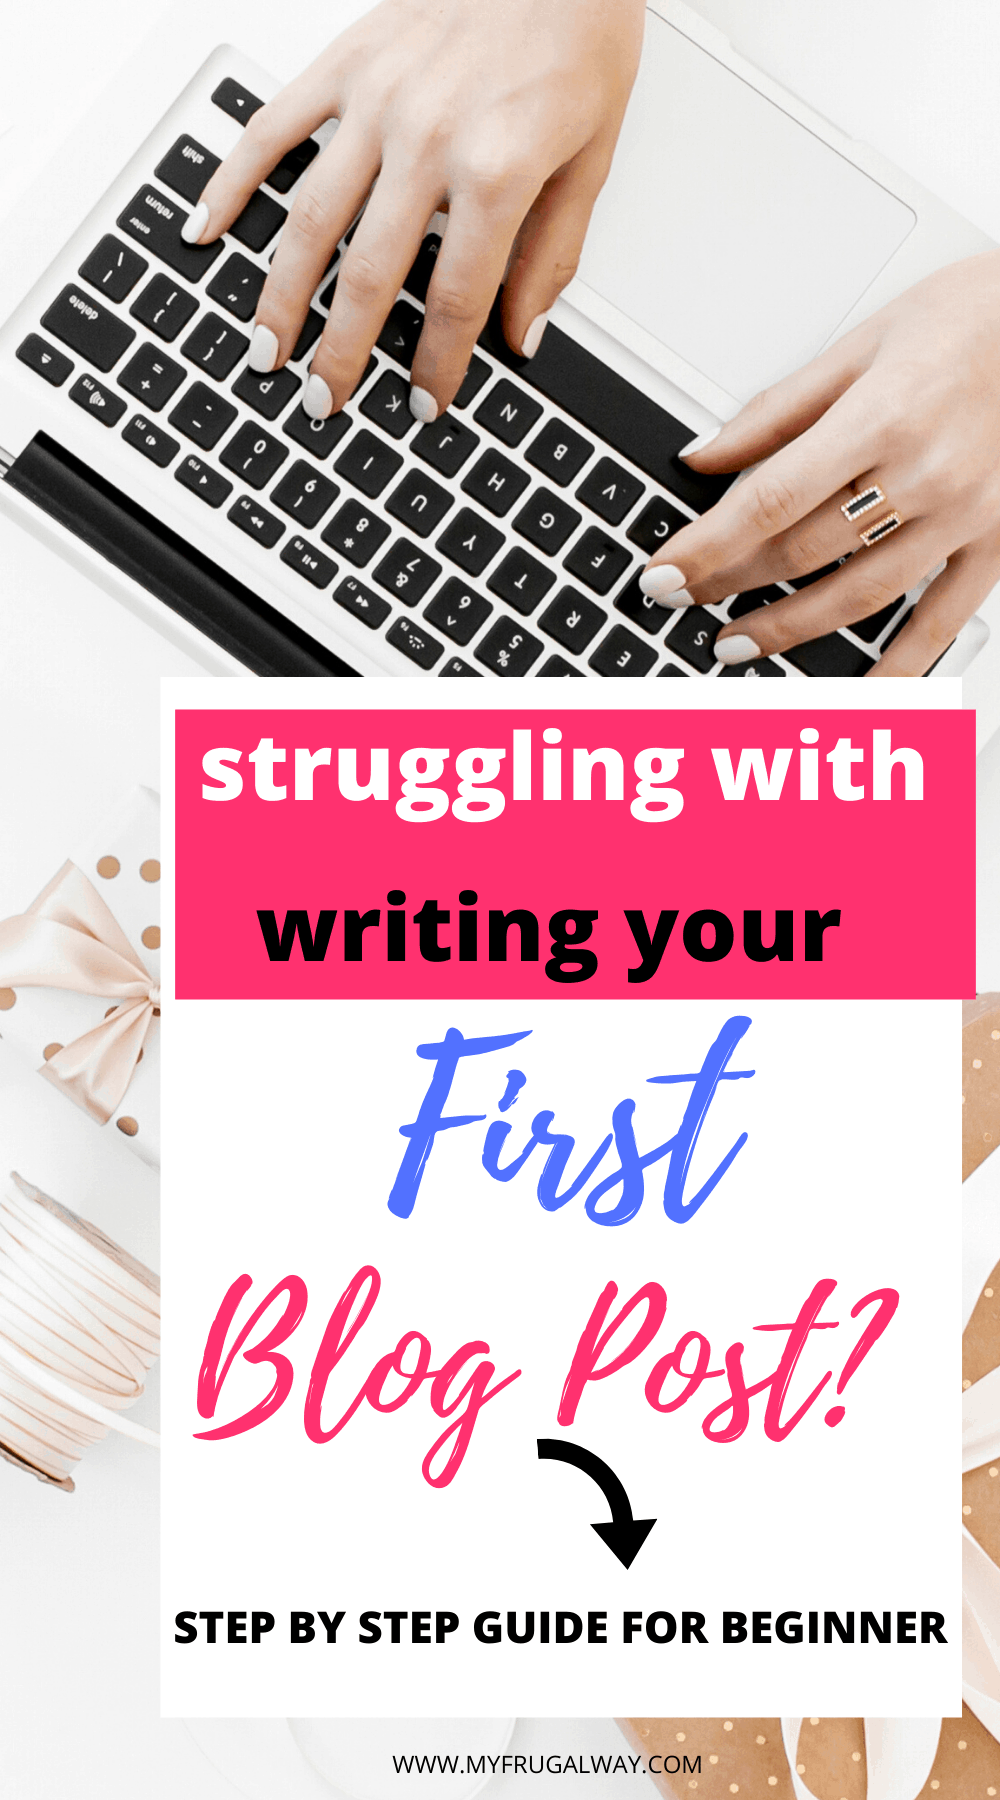 Beginner blogging tips using wordpress. Best step by step tutorial to help you write your first blog post in WordPress. All you need to know how to write and publish your very first blog post.